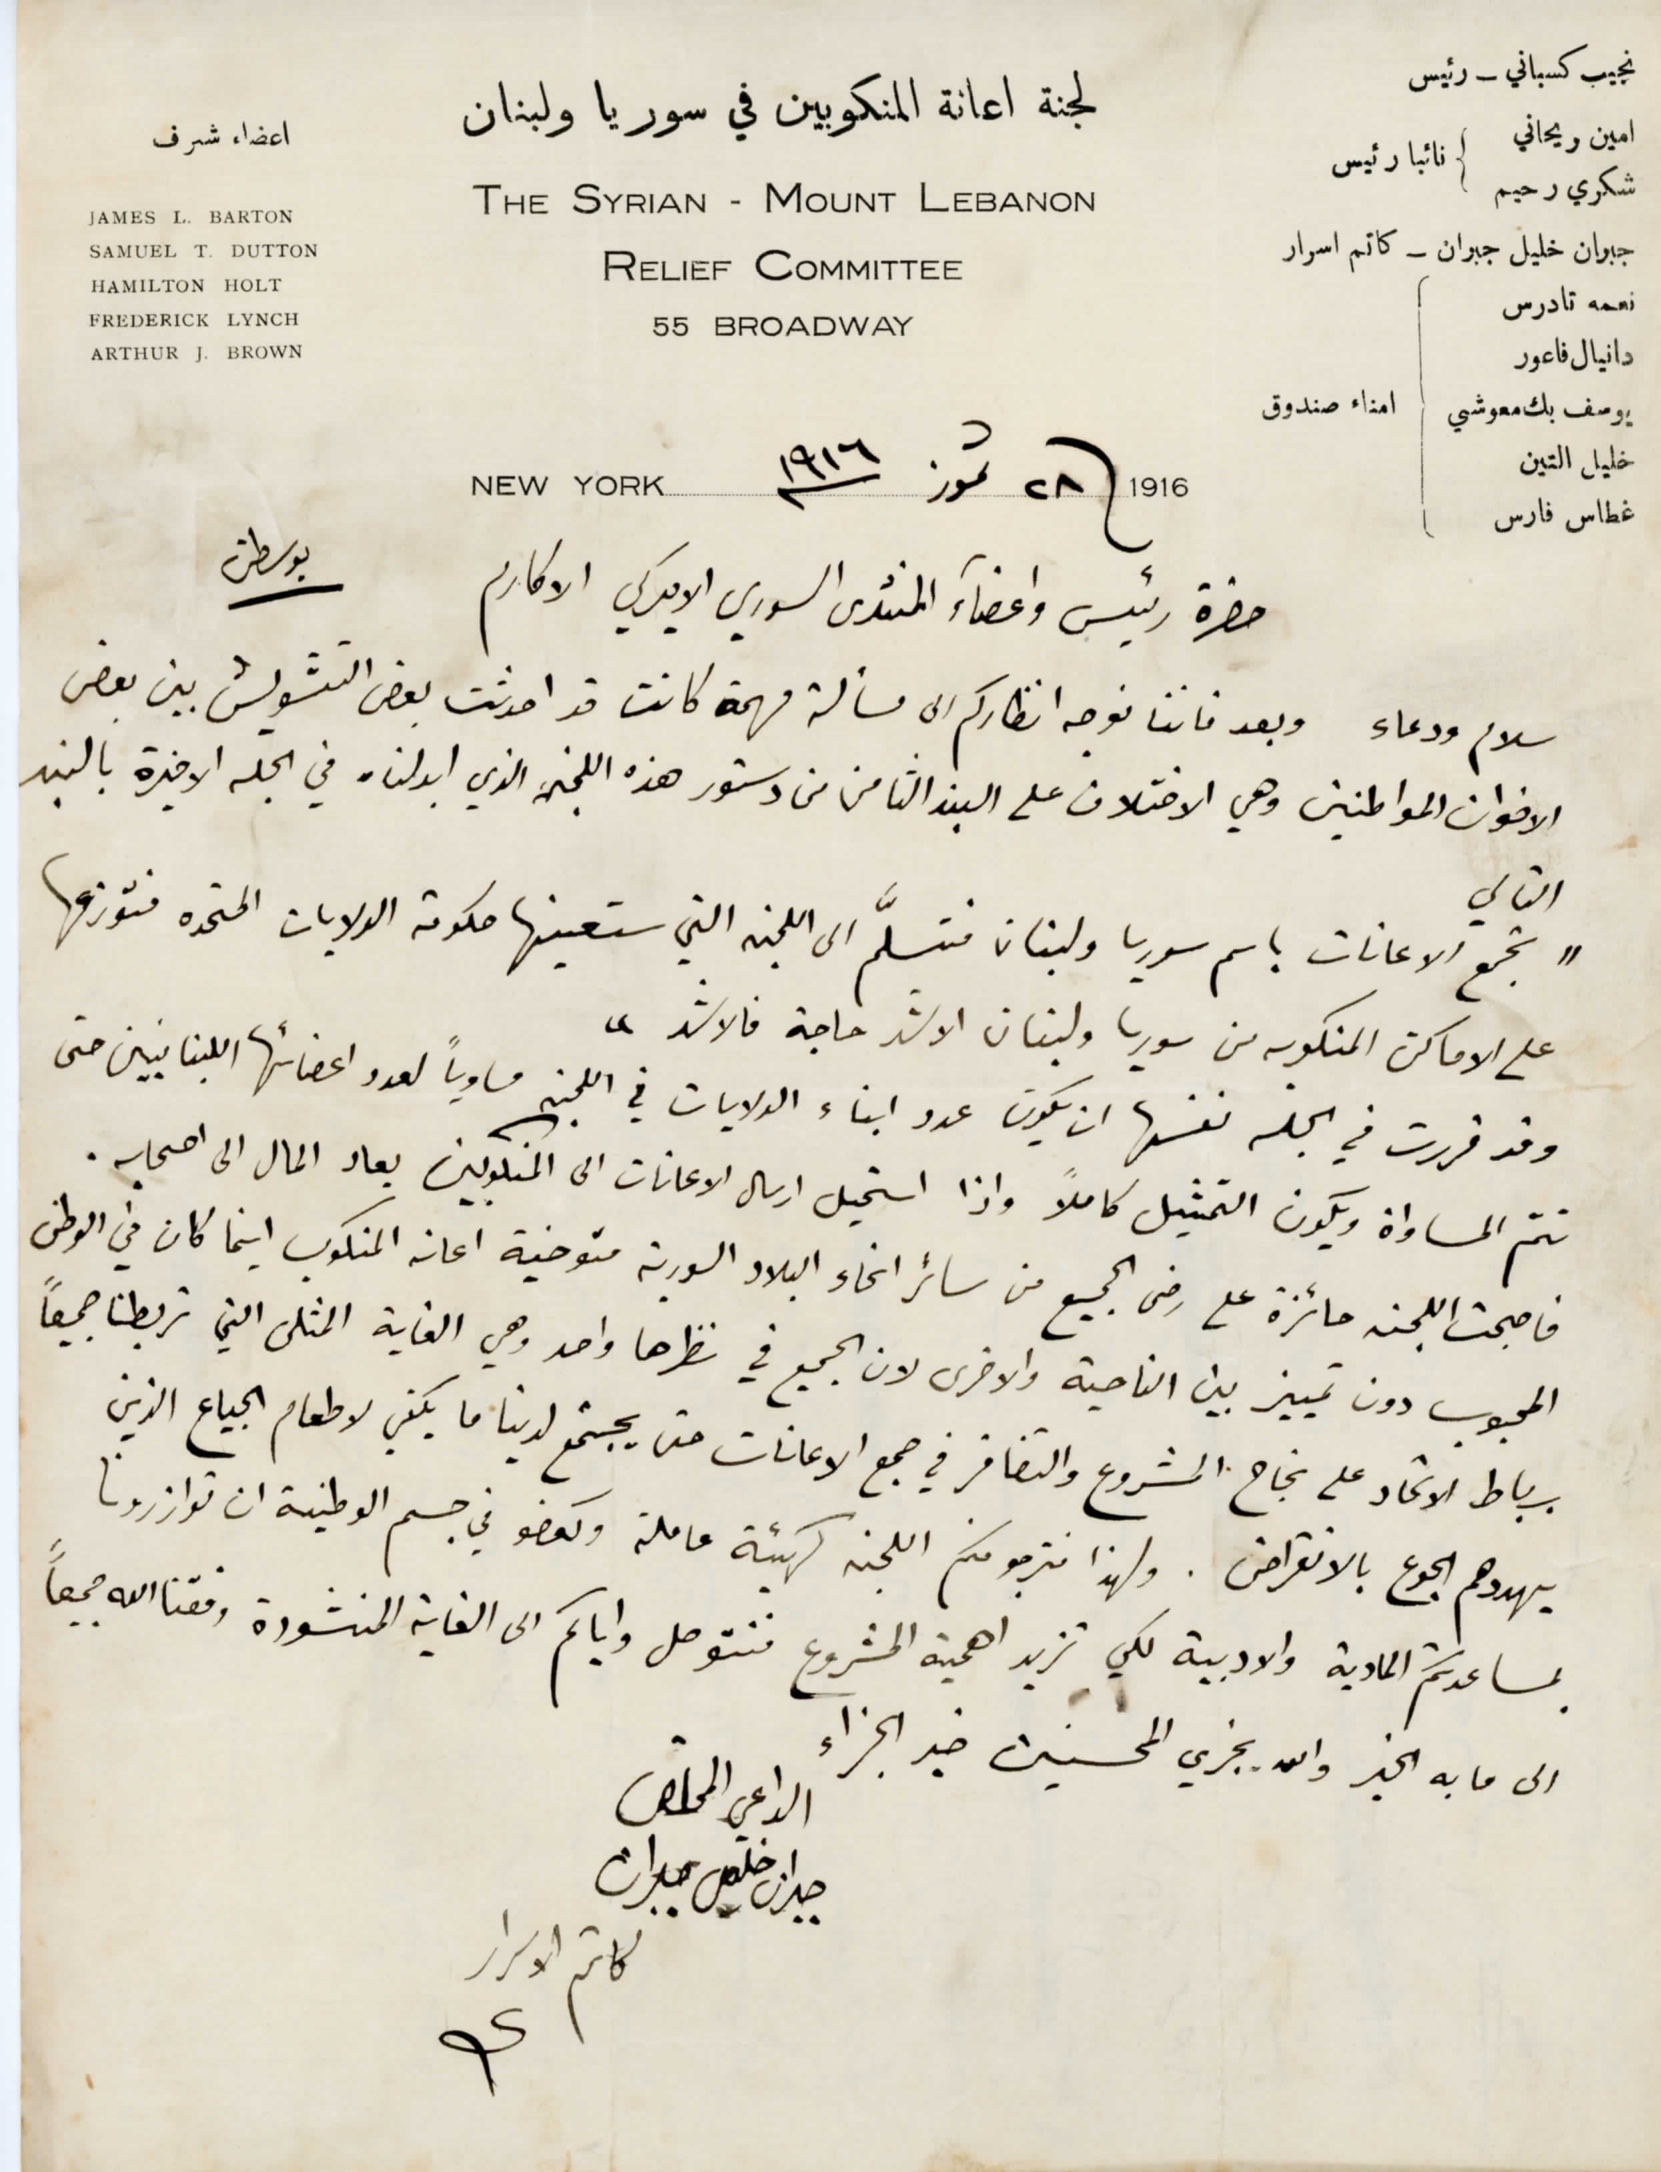 Letter from Kahlil Gibran to the president of the Syrian American Club of Boston, asking him to support the Syrian-Mount Lebanon Relief Committee - dated 28th of July 1916 - Arab American National Museum